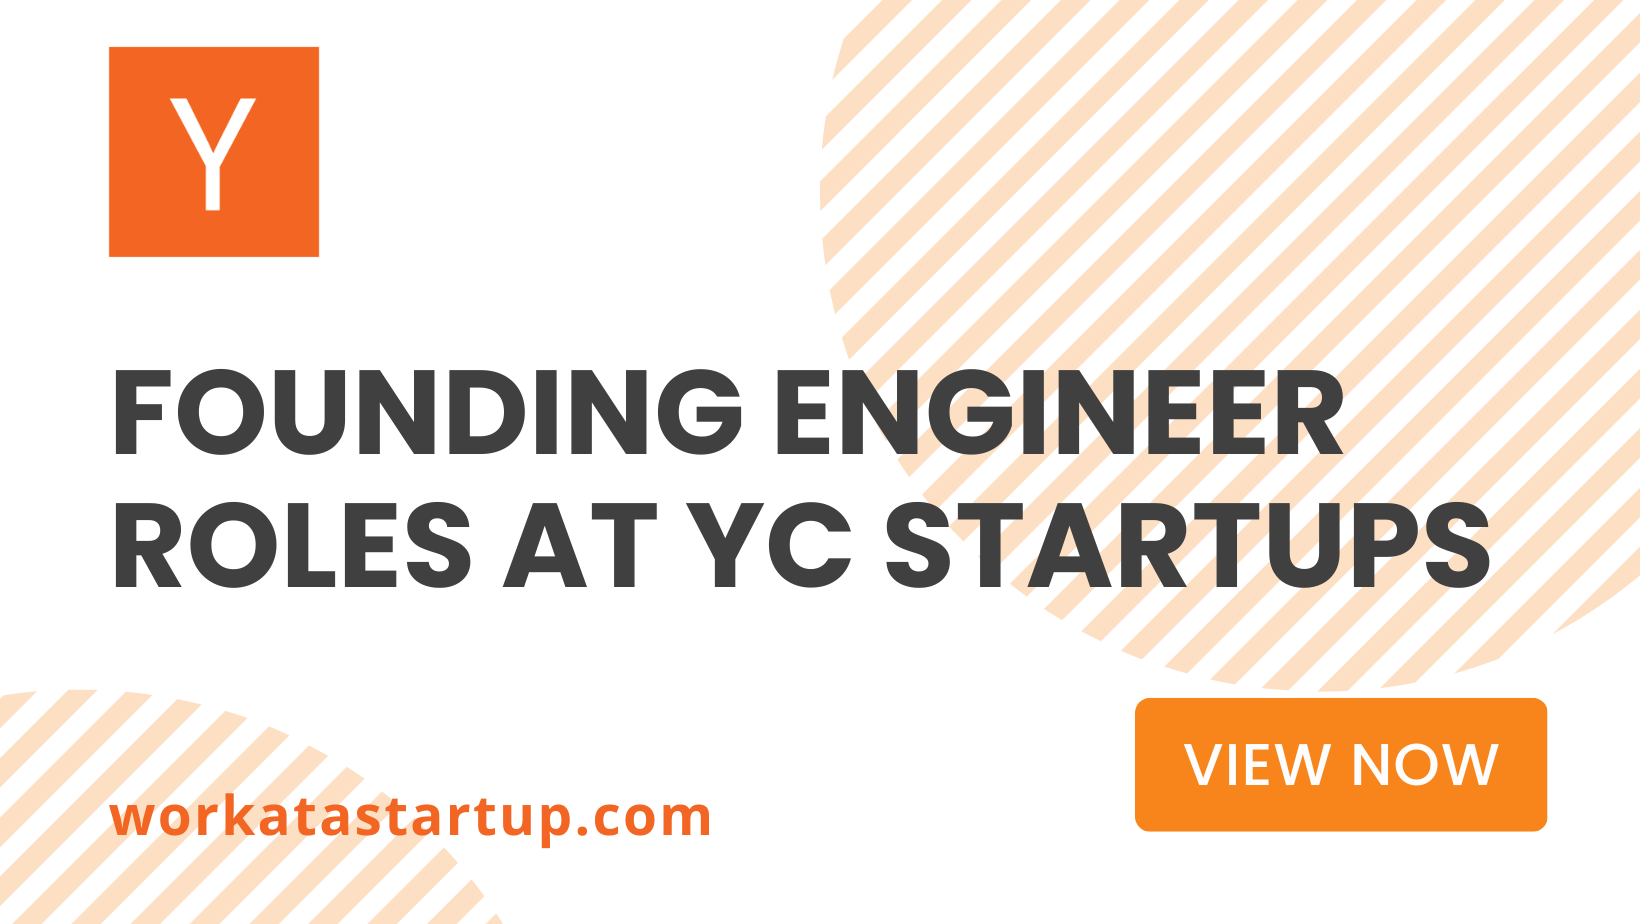 6 founding engineer roles at W22 YC startups